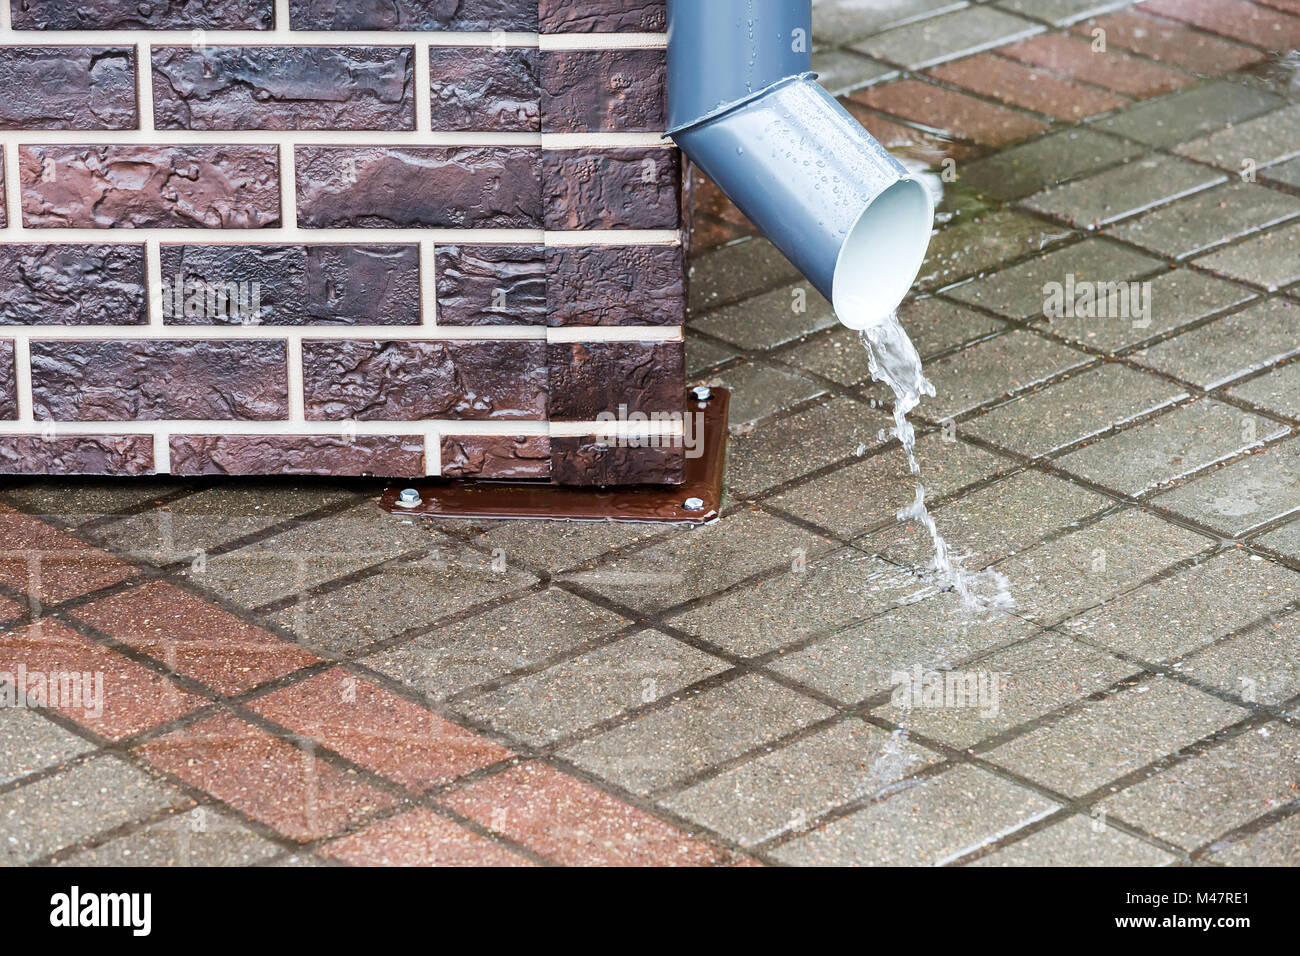 rain water flowing from a downspout Stock Photo